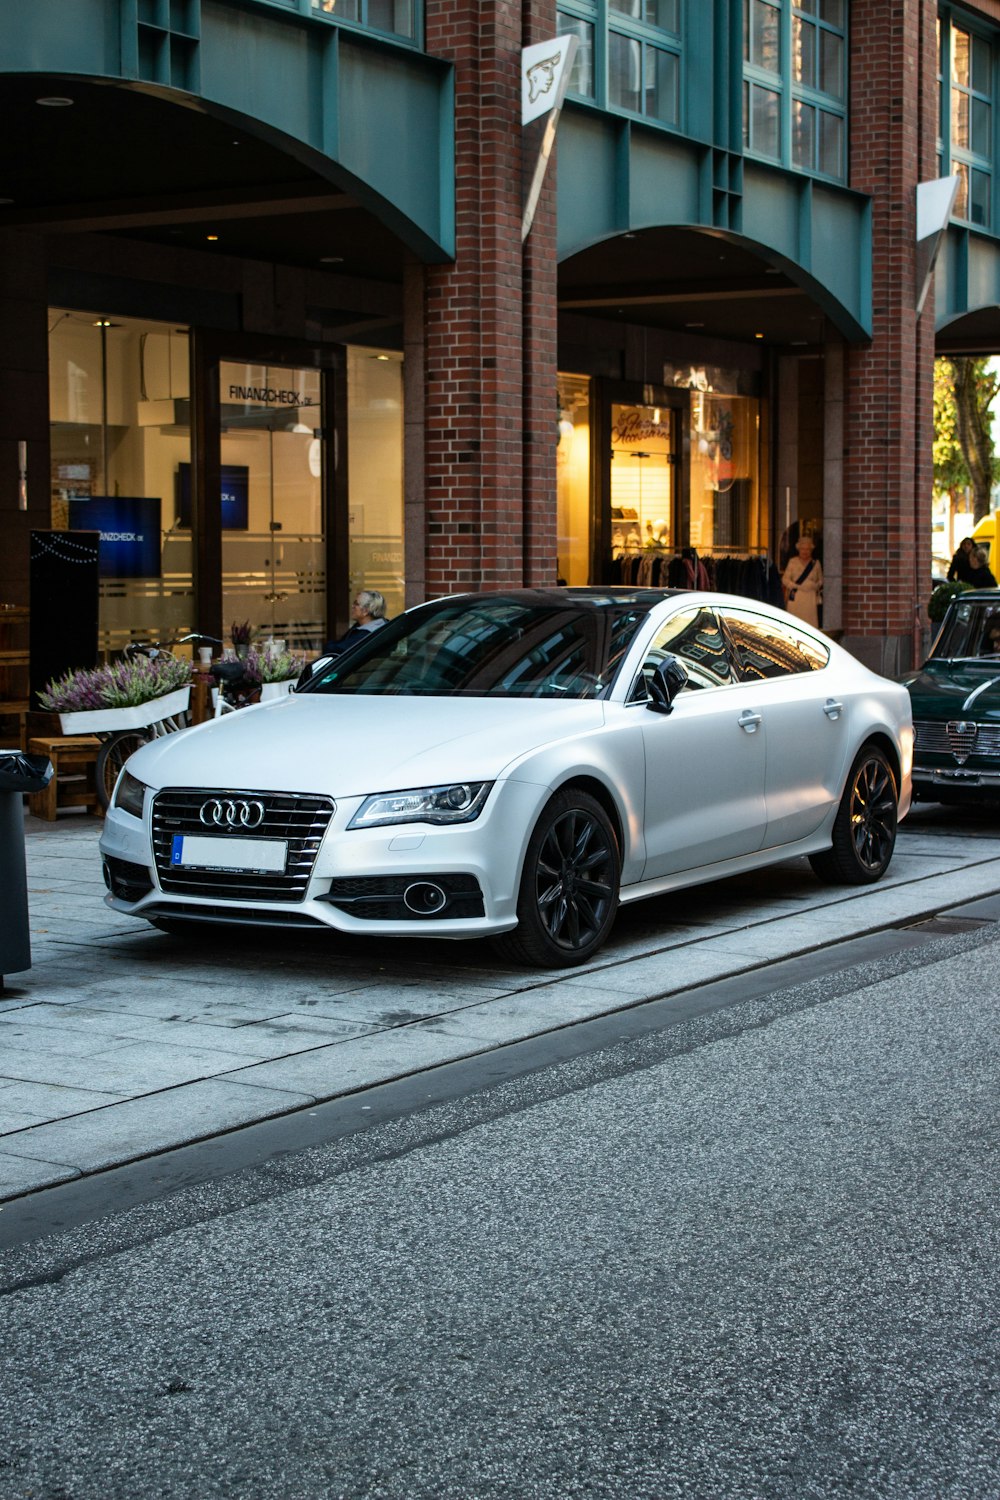 500 Audi Pictures Hd Download Free Images On Unsplash